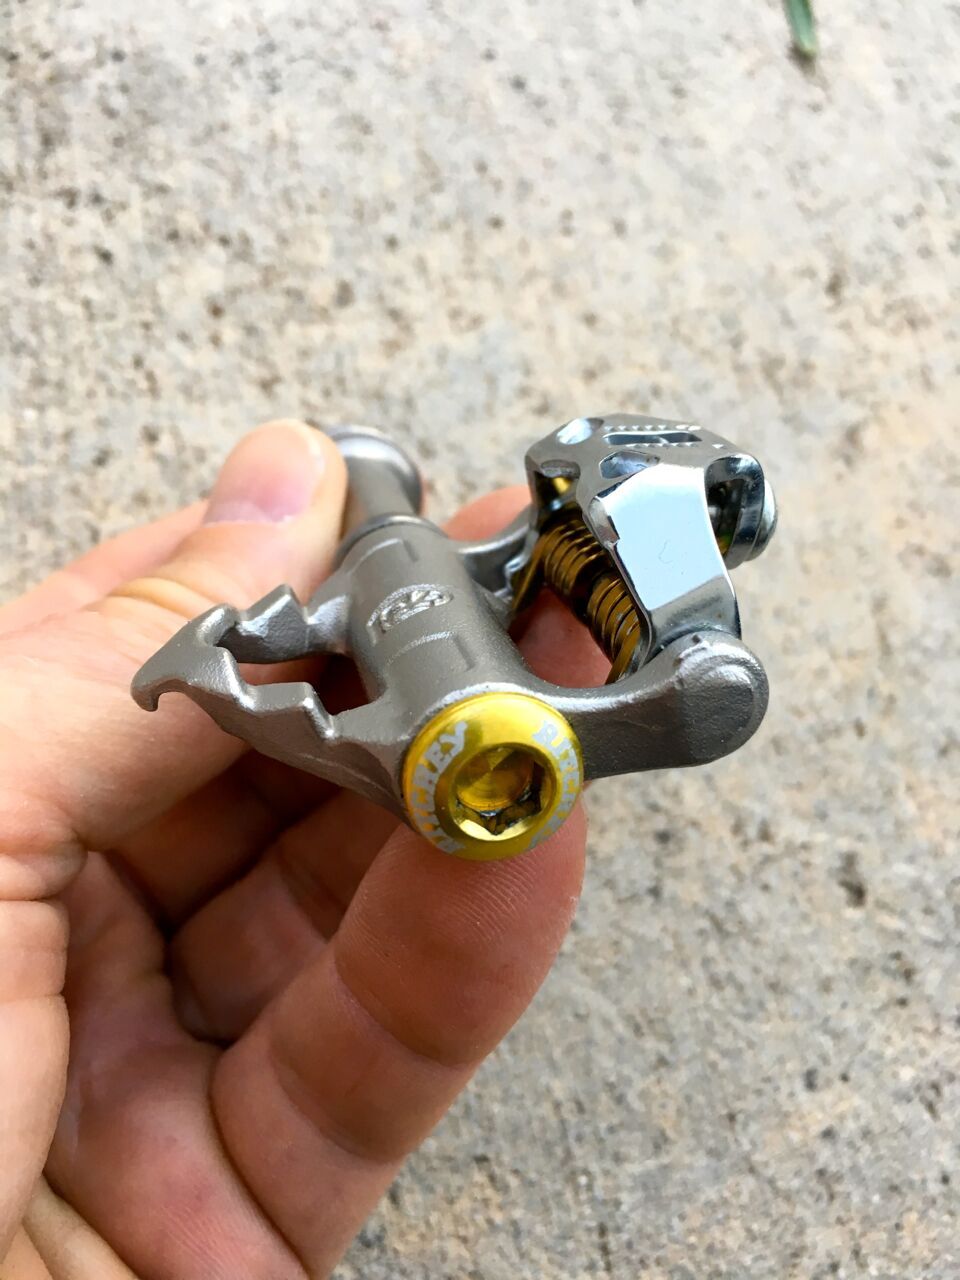 ritchey wcs micro pedals